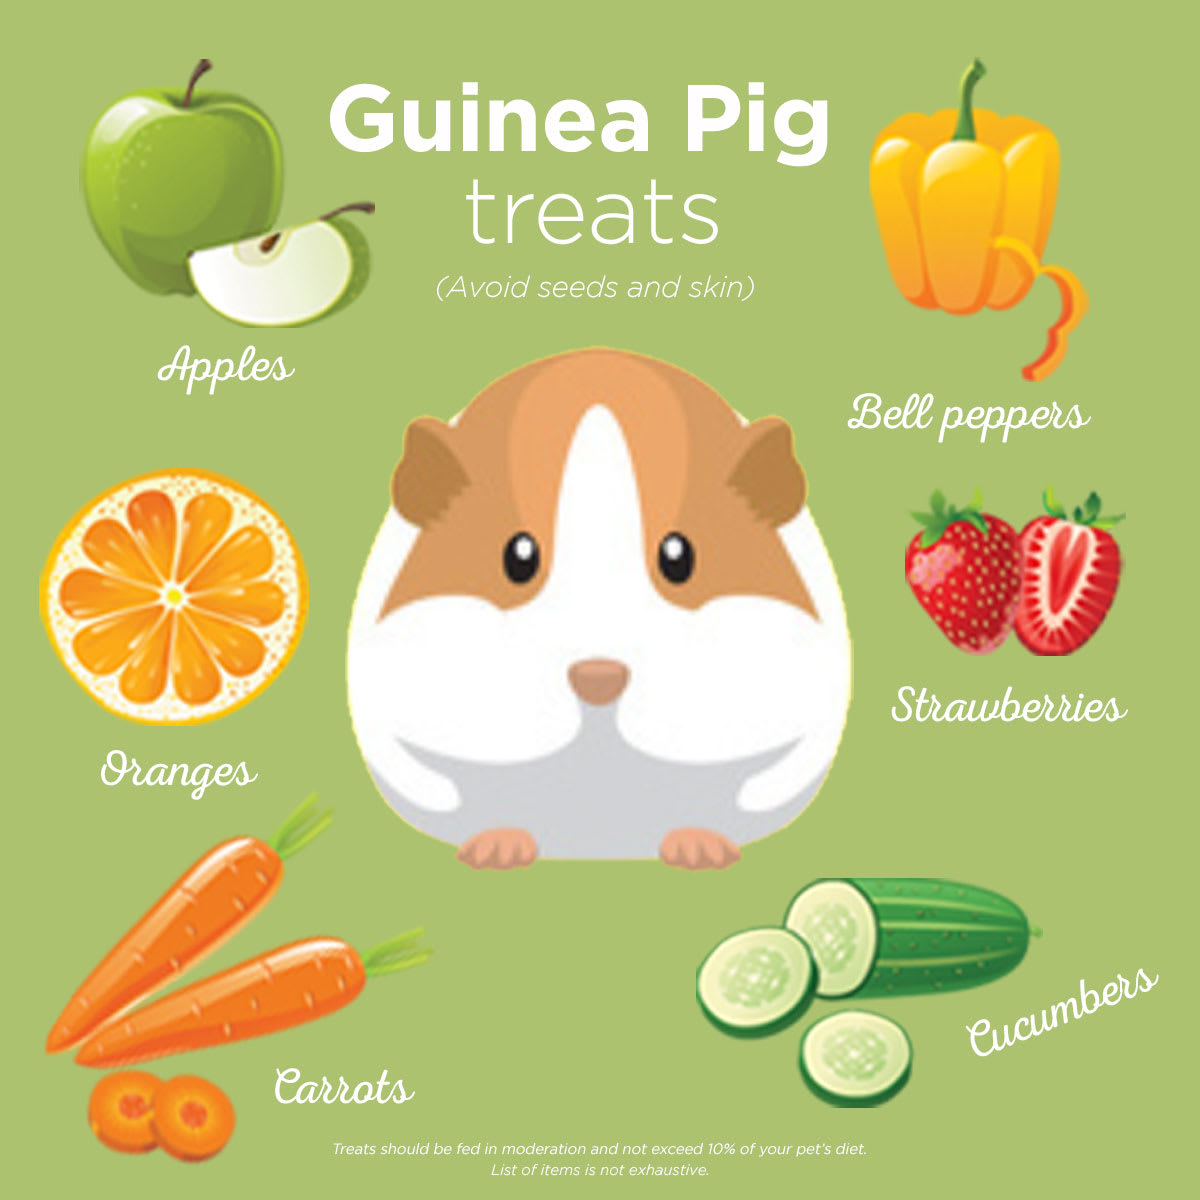 How do I introduce new food to my guinea pig?